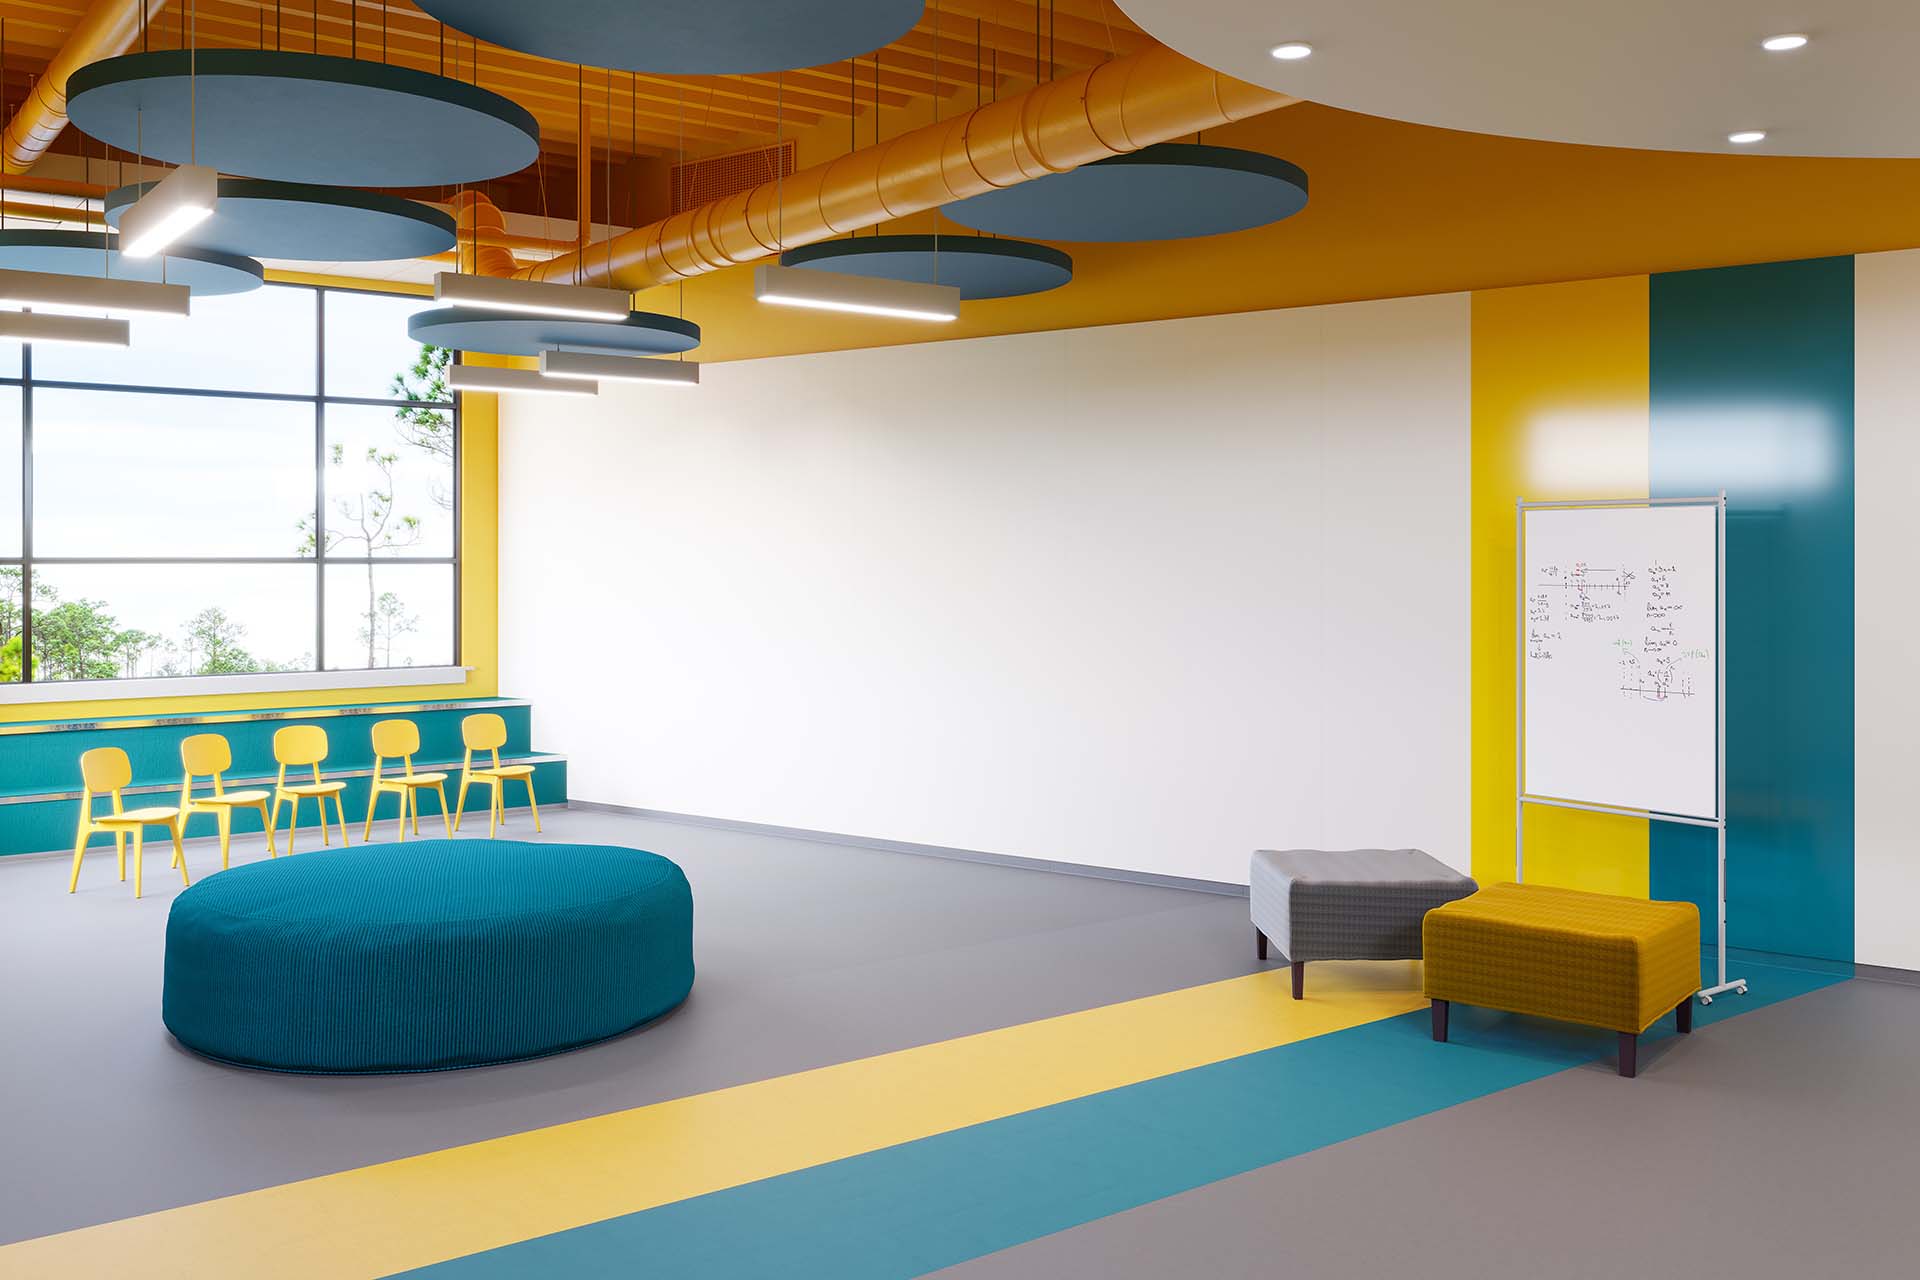 Altro floors and walls installed in a class